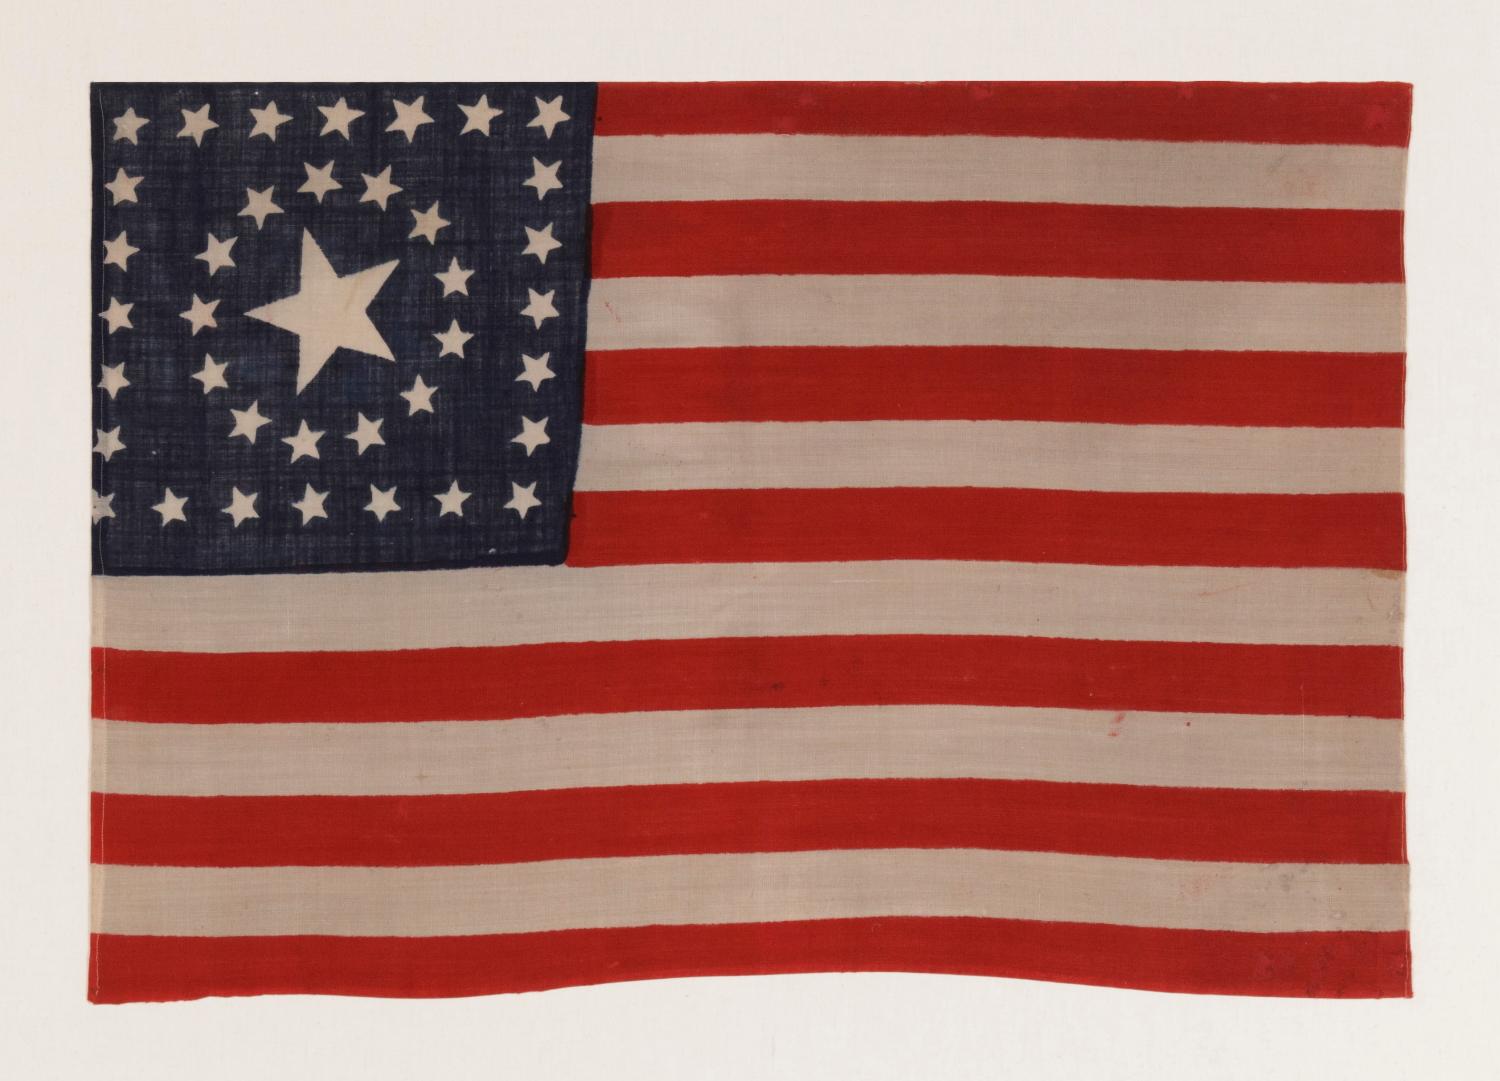 38 STARS IN A RARE CIRCLE-IN-A-SQUARE MEDALLION WITH A HUGE CENTER STAR, MADE FOR THE 1876 CENTENNIAL INTERNATIONAL EXPOSITION BY HORSTMANN BROS. IN PHILADELPHIA 

38 star American national parade flag, press-dyed on wool bunting, with an especially